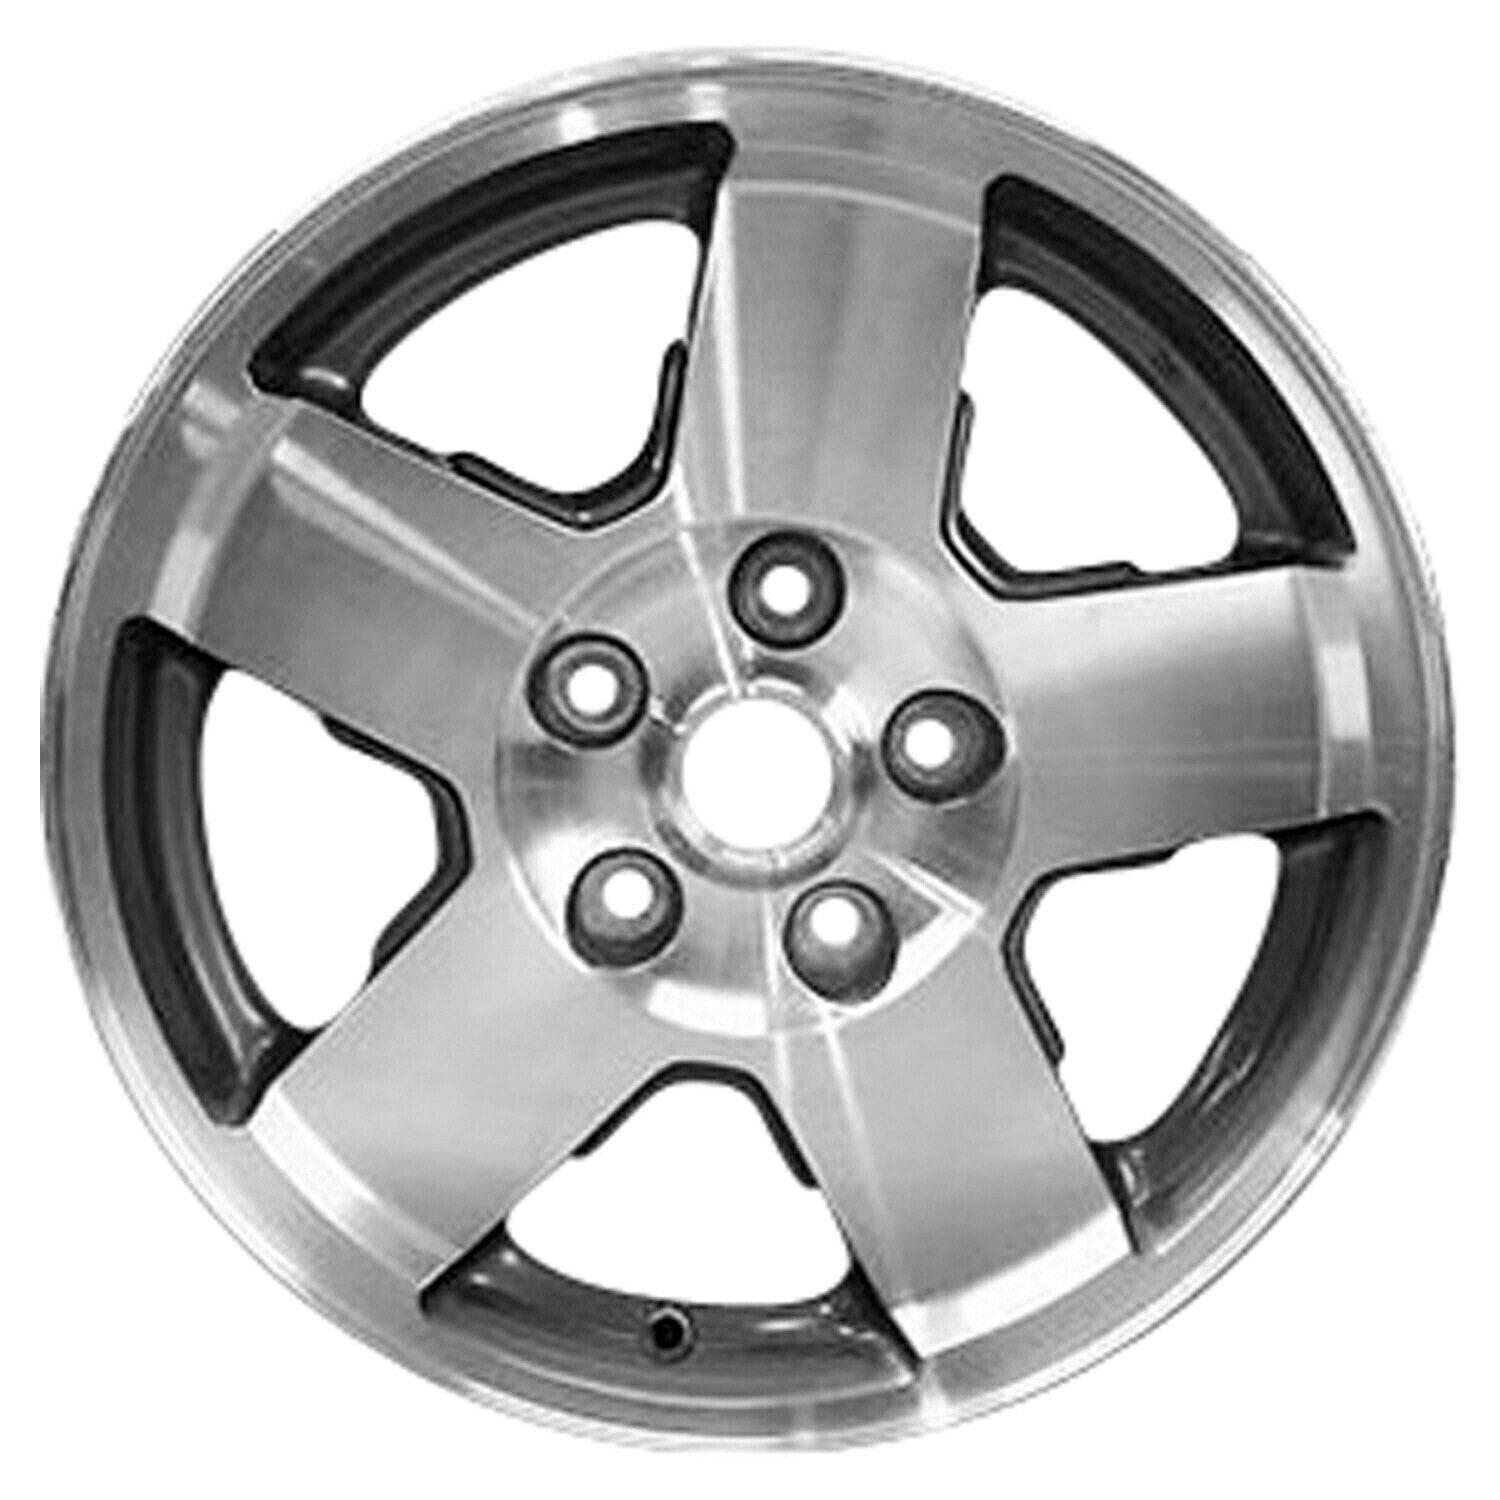 09096 Reconditioned OEM Aluminum Wheel 17x7.5 fits 2006-2010 Jeep Commander